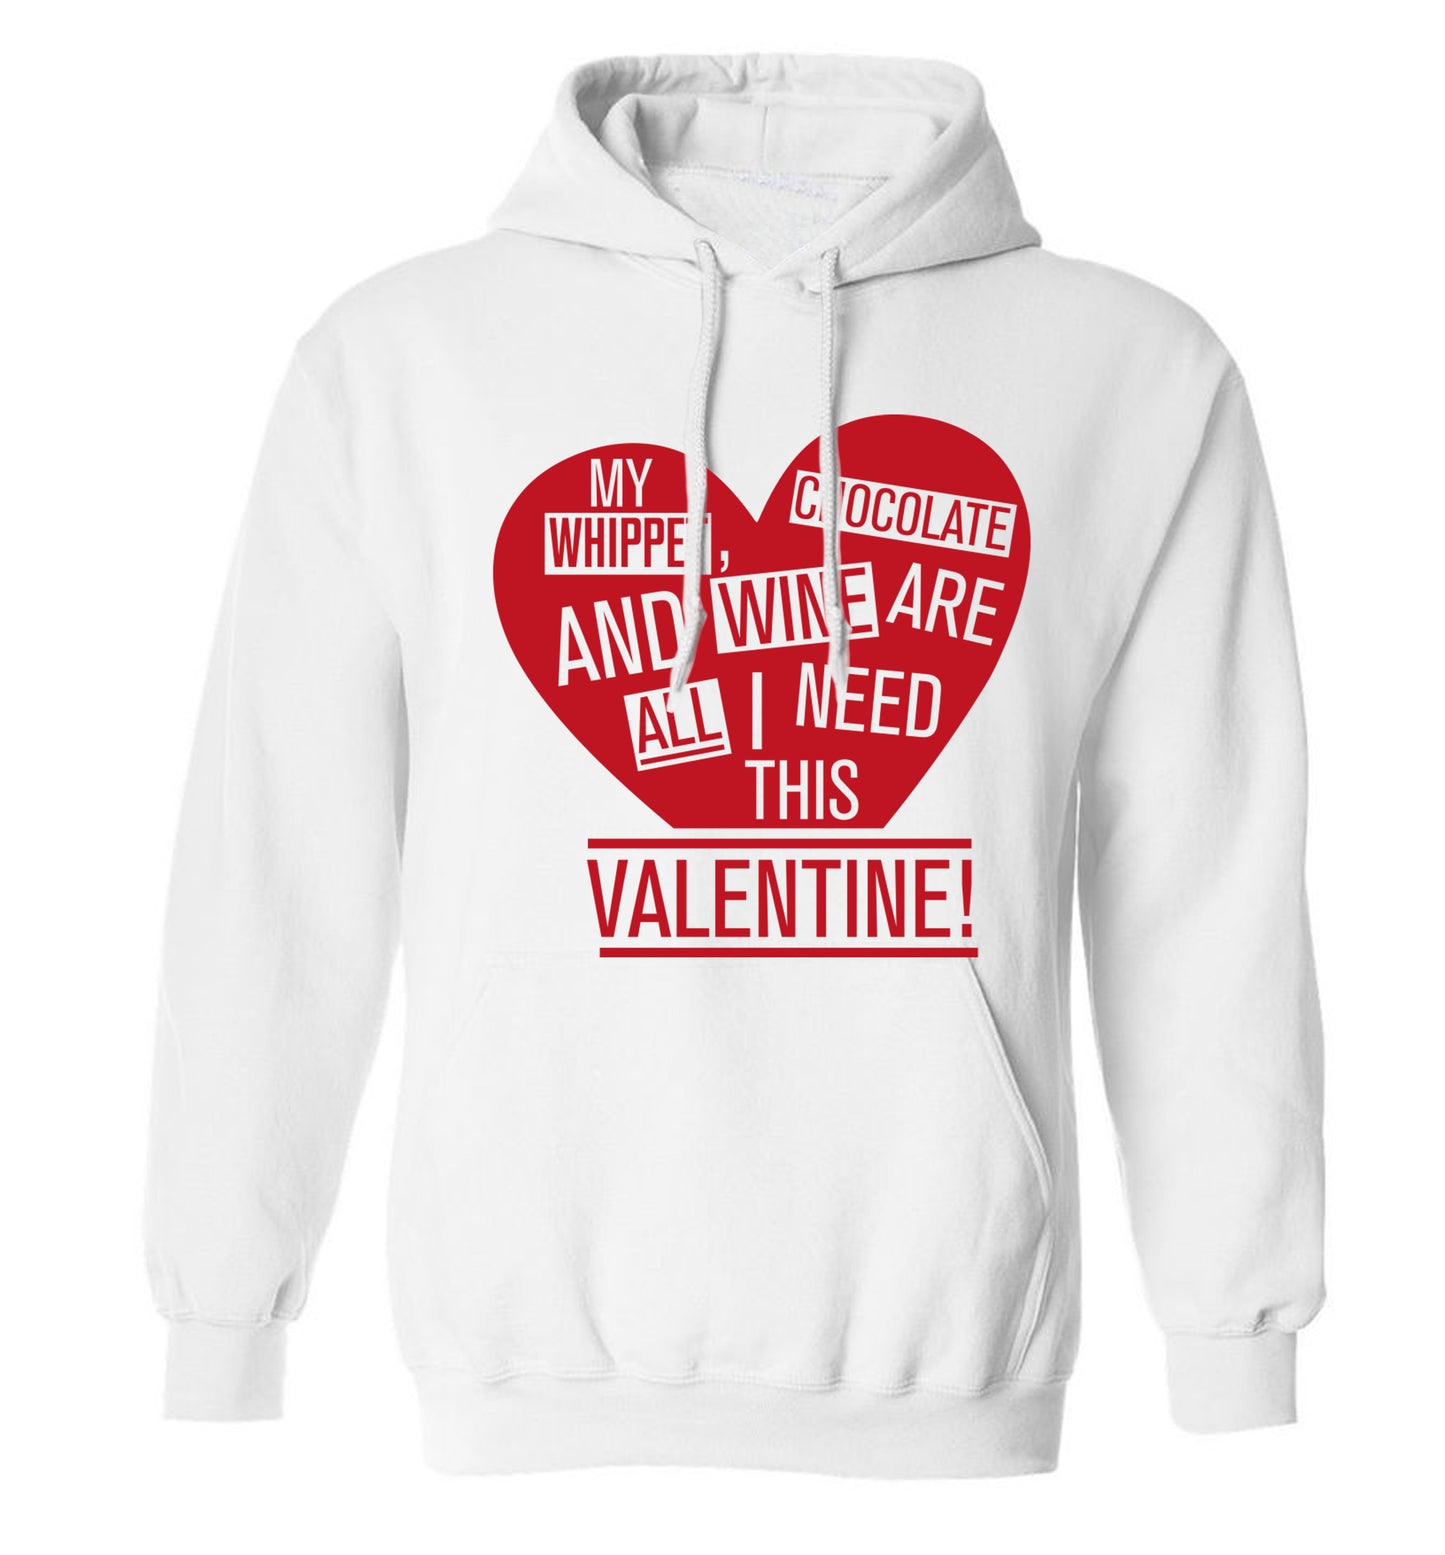 My whippet, chocolate and wine are all I need this valentine! adults unisex white hoodie 2XL